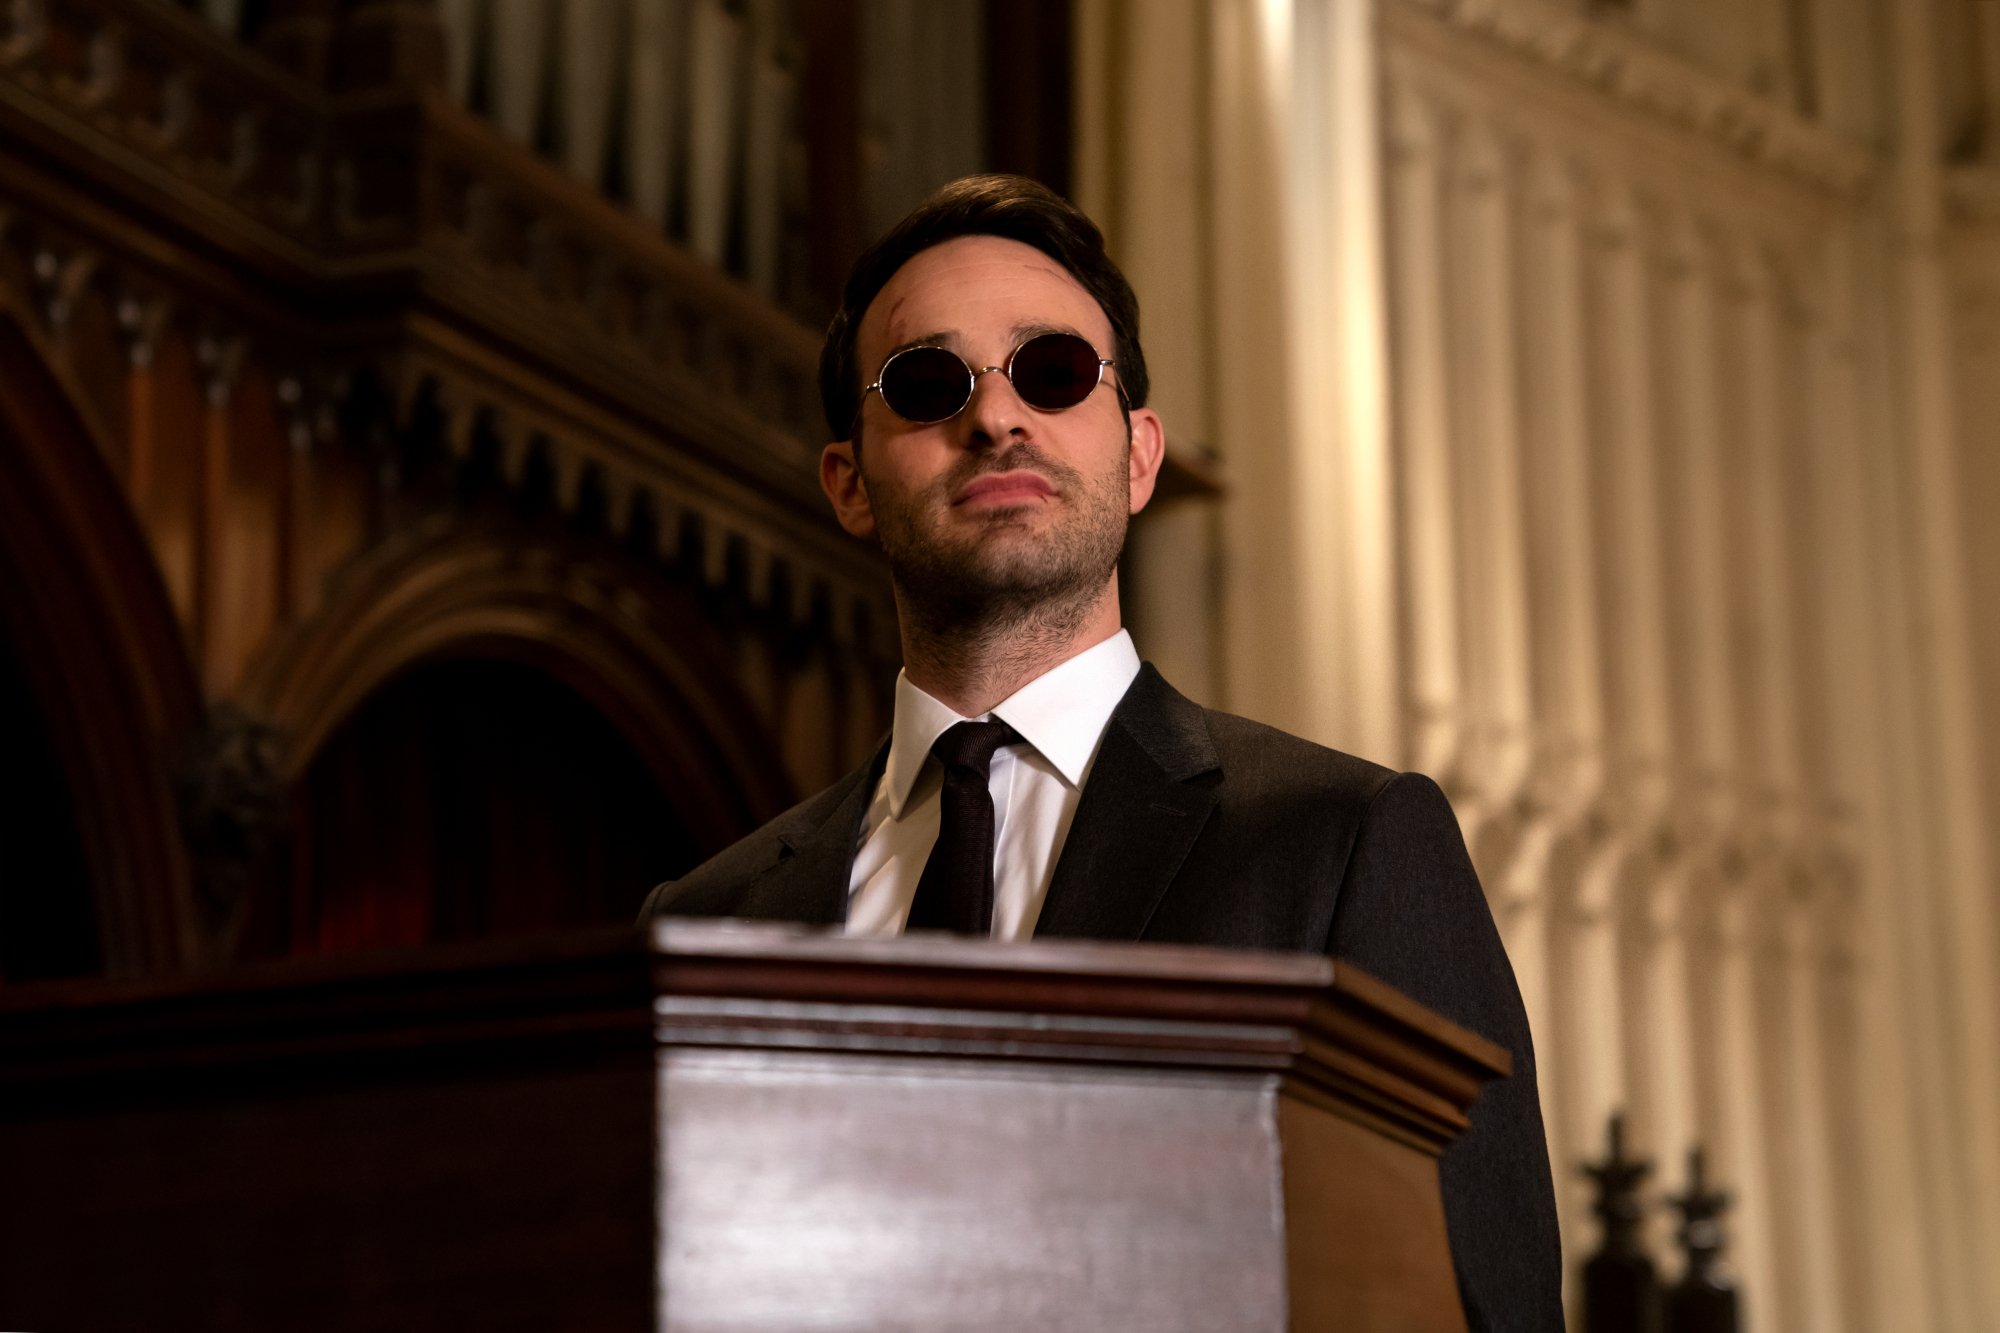 Charlie Cox as Matt Murdock, who will return in Marvel's 'Daredevil' reboot on Disney+. He's standing at a podium and wearing dark glasses.